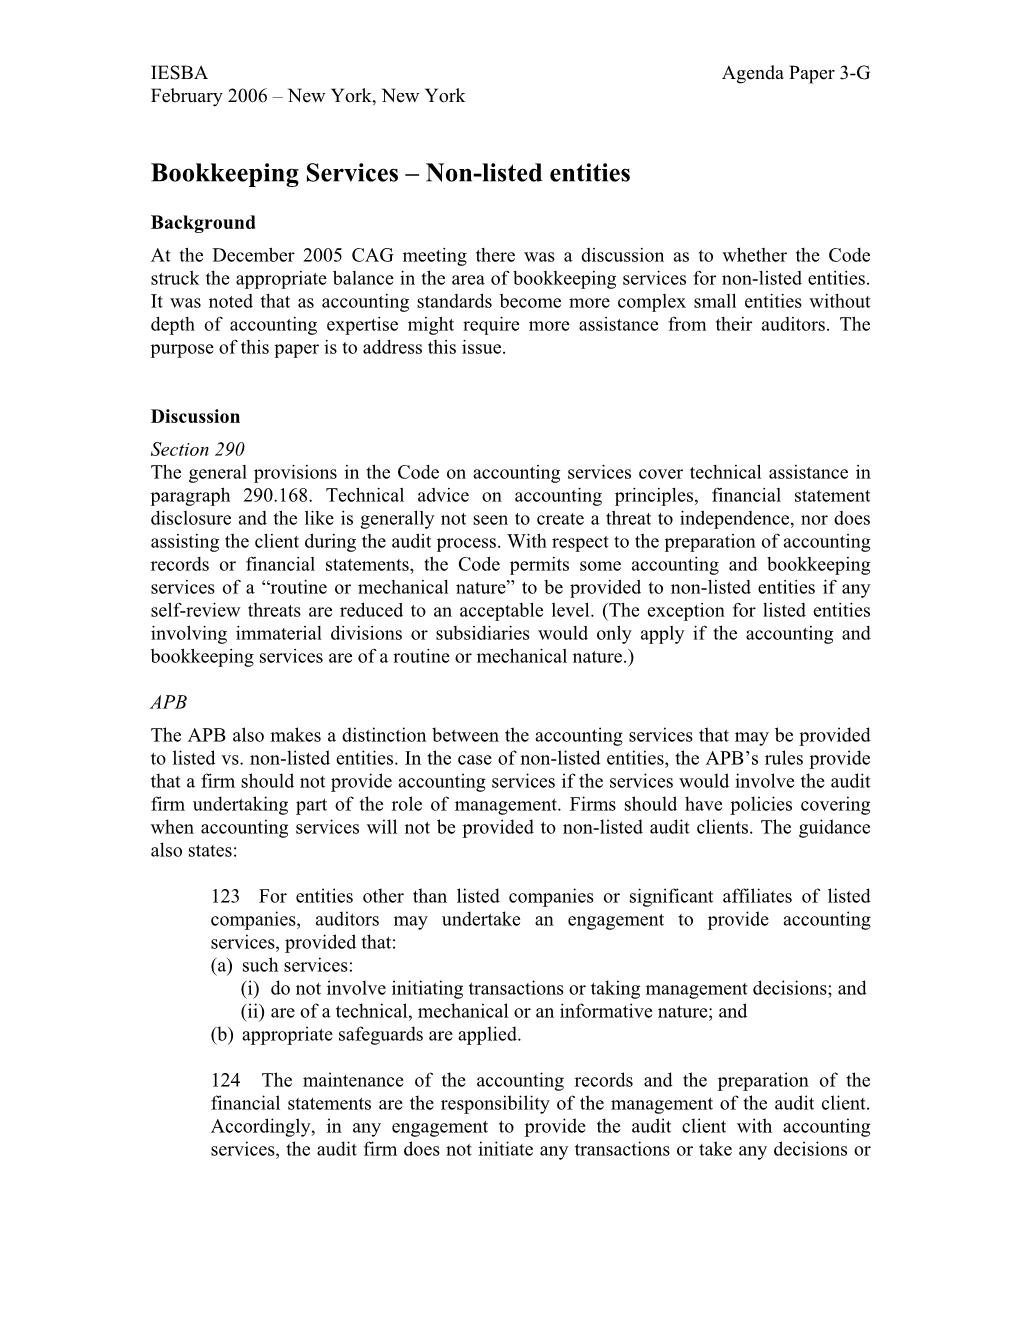 Bookkeeping Services – Non-Listed Entities